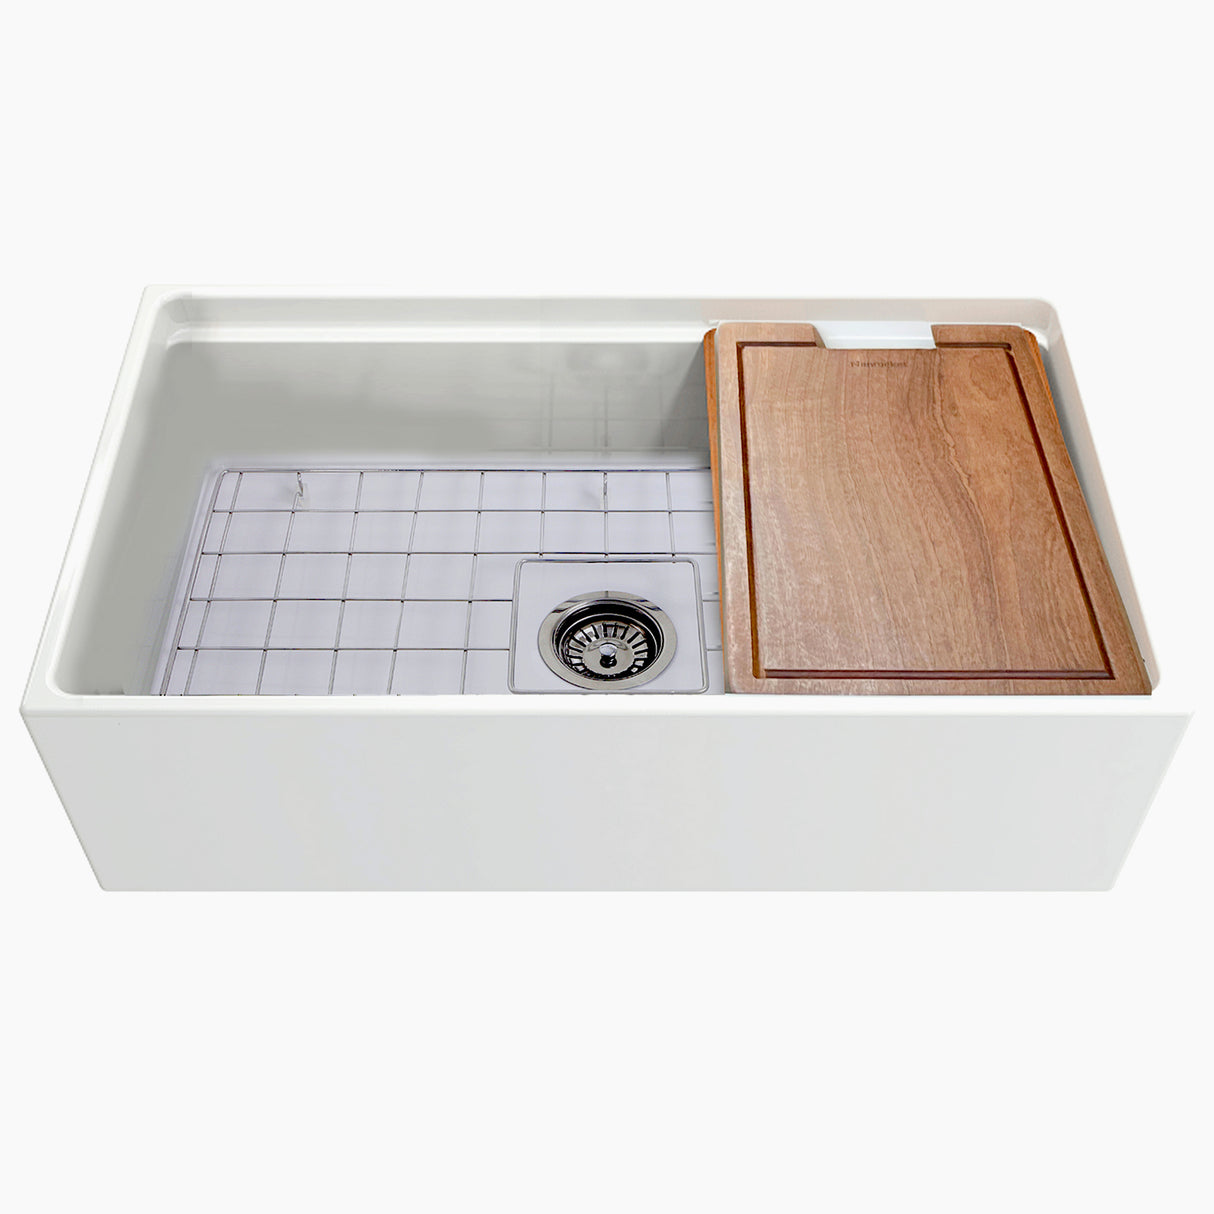 Nantucket Sinks 33-inch Workstation Fireclay Apron Sink with Accessories - White